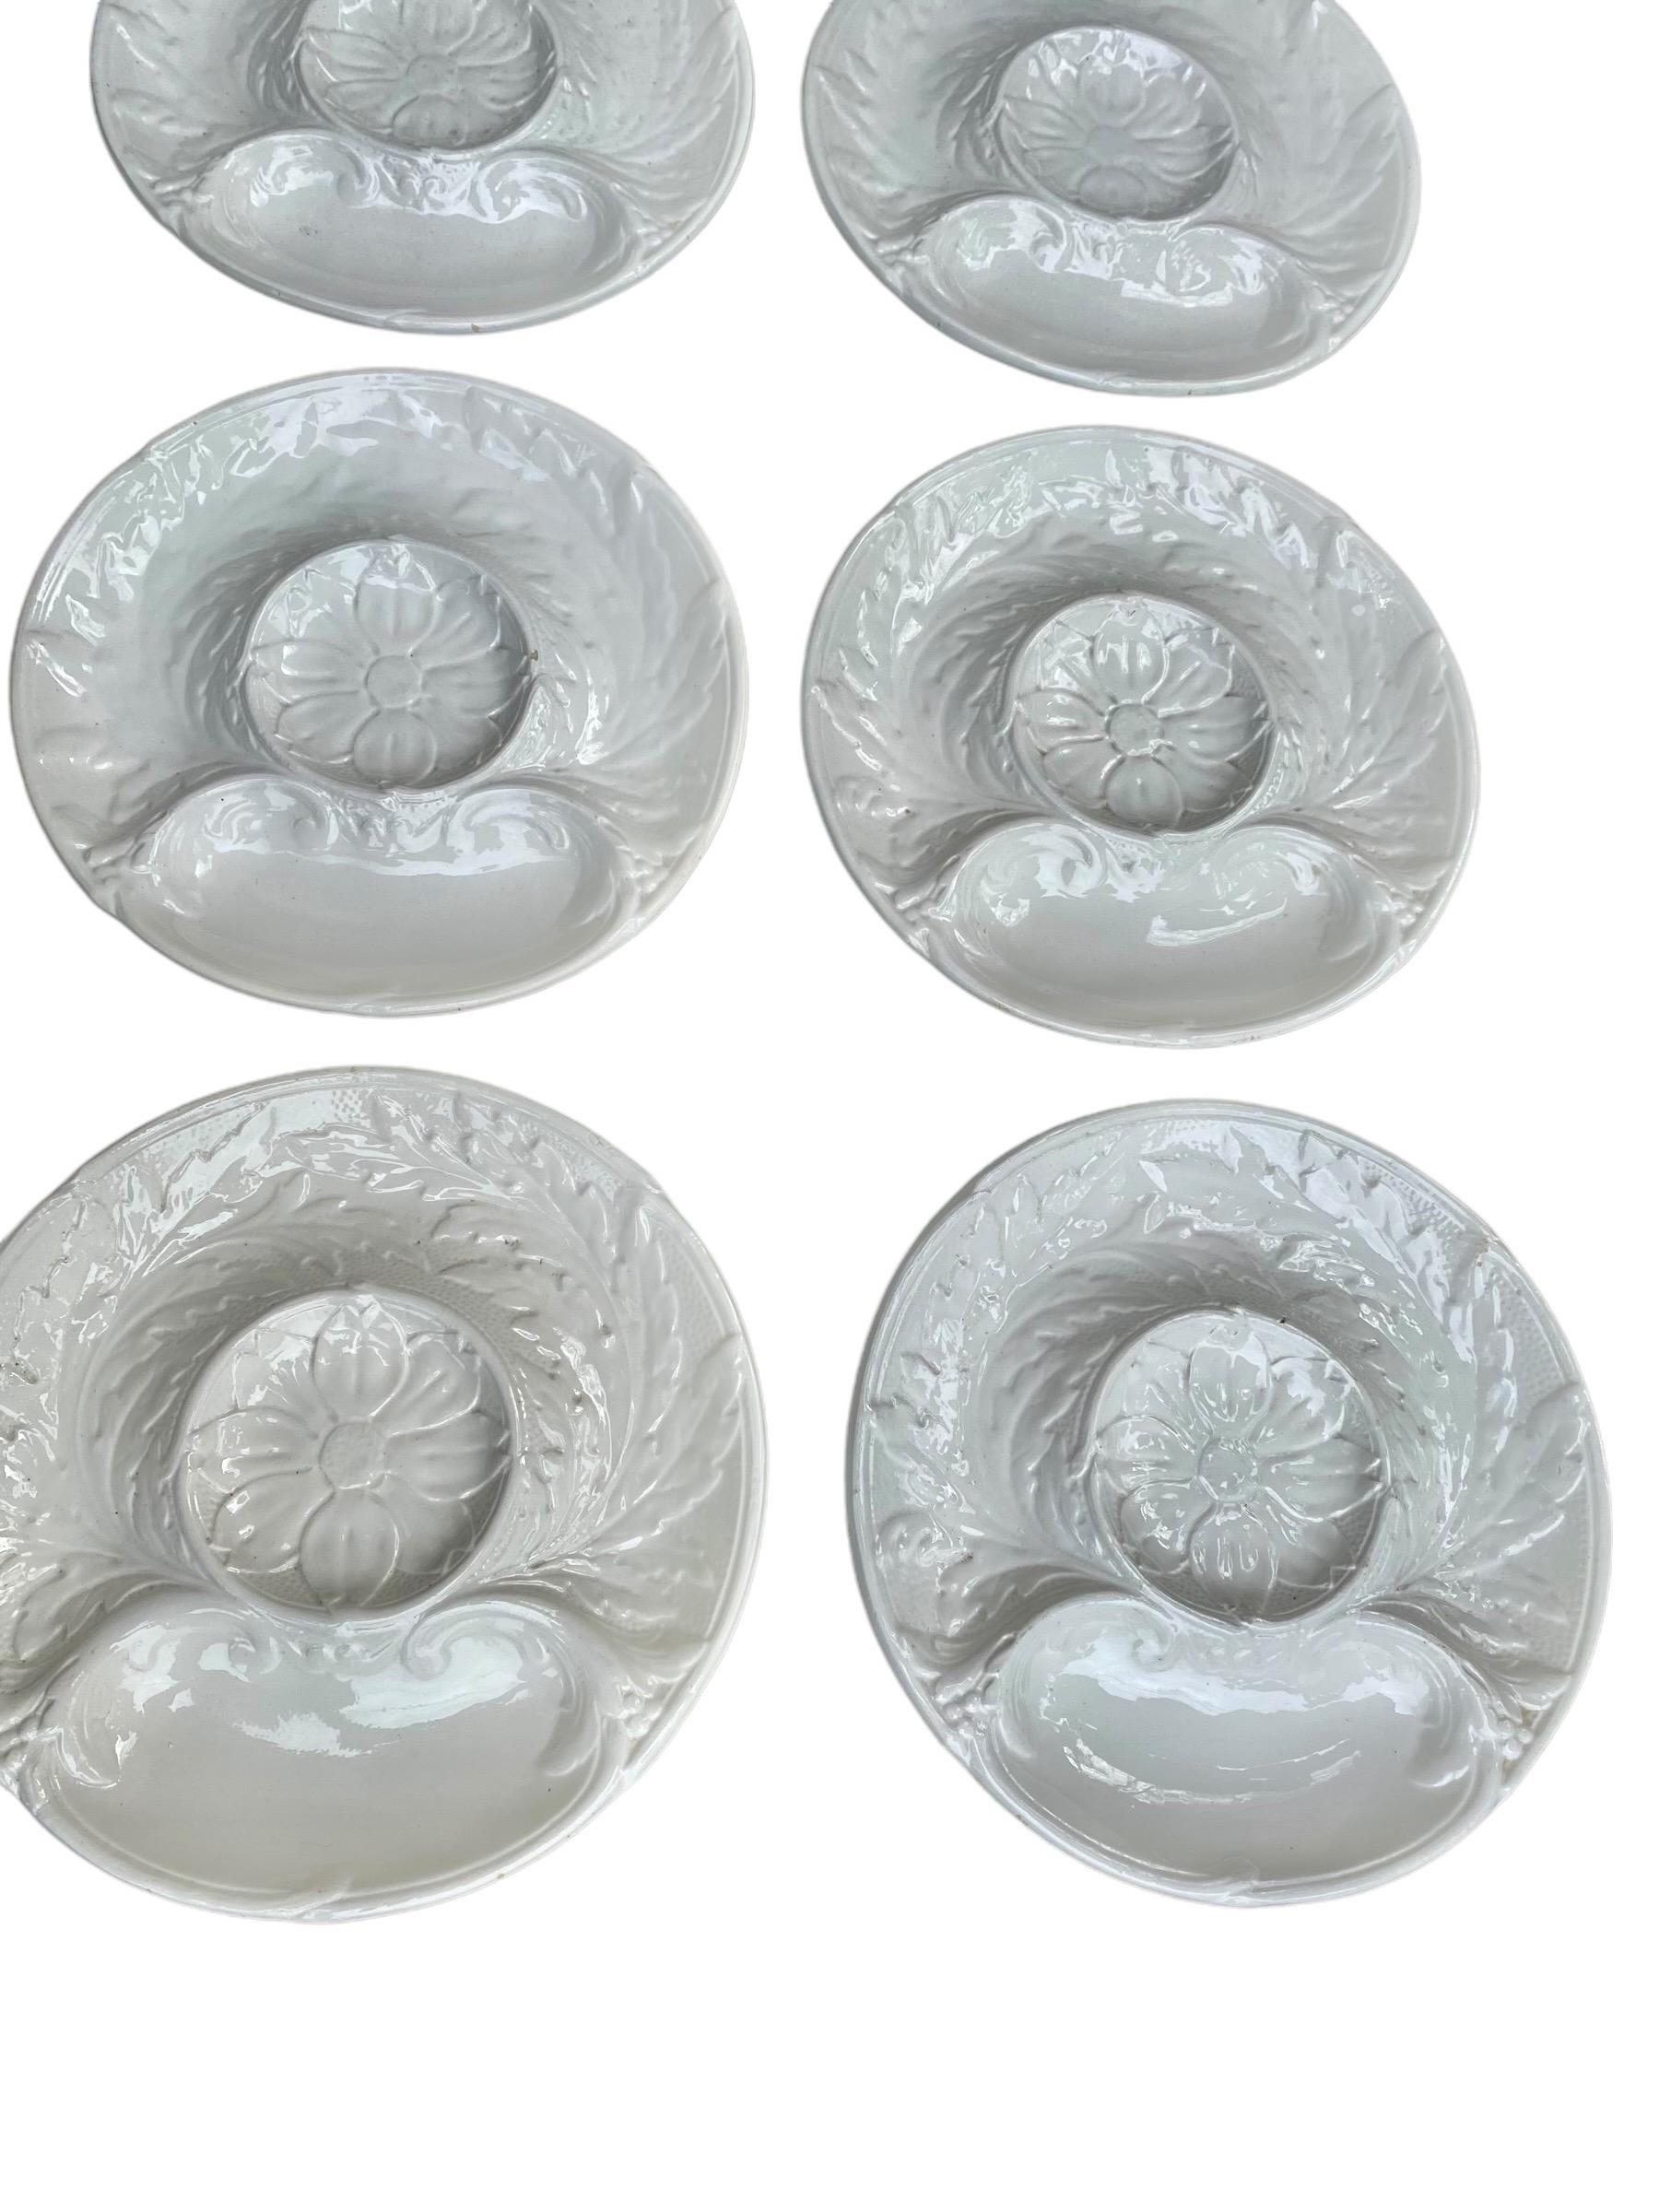 Rustic Antique French Faience Artichoke Plates, Set of Ten For Sale